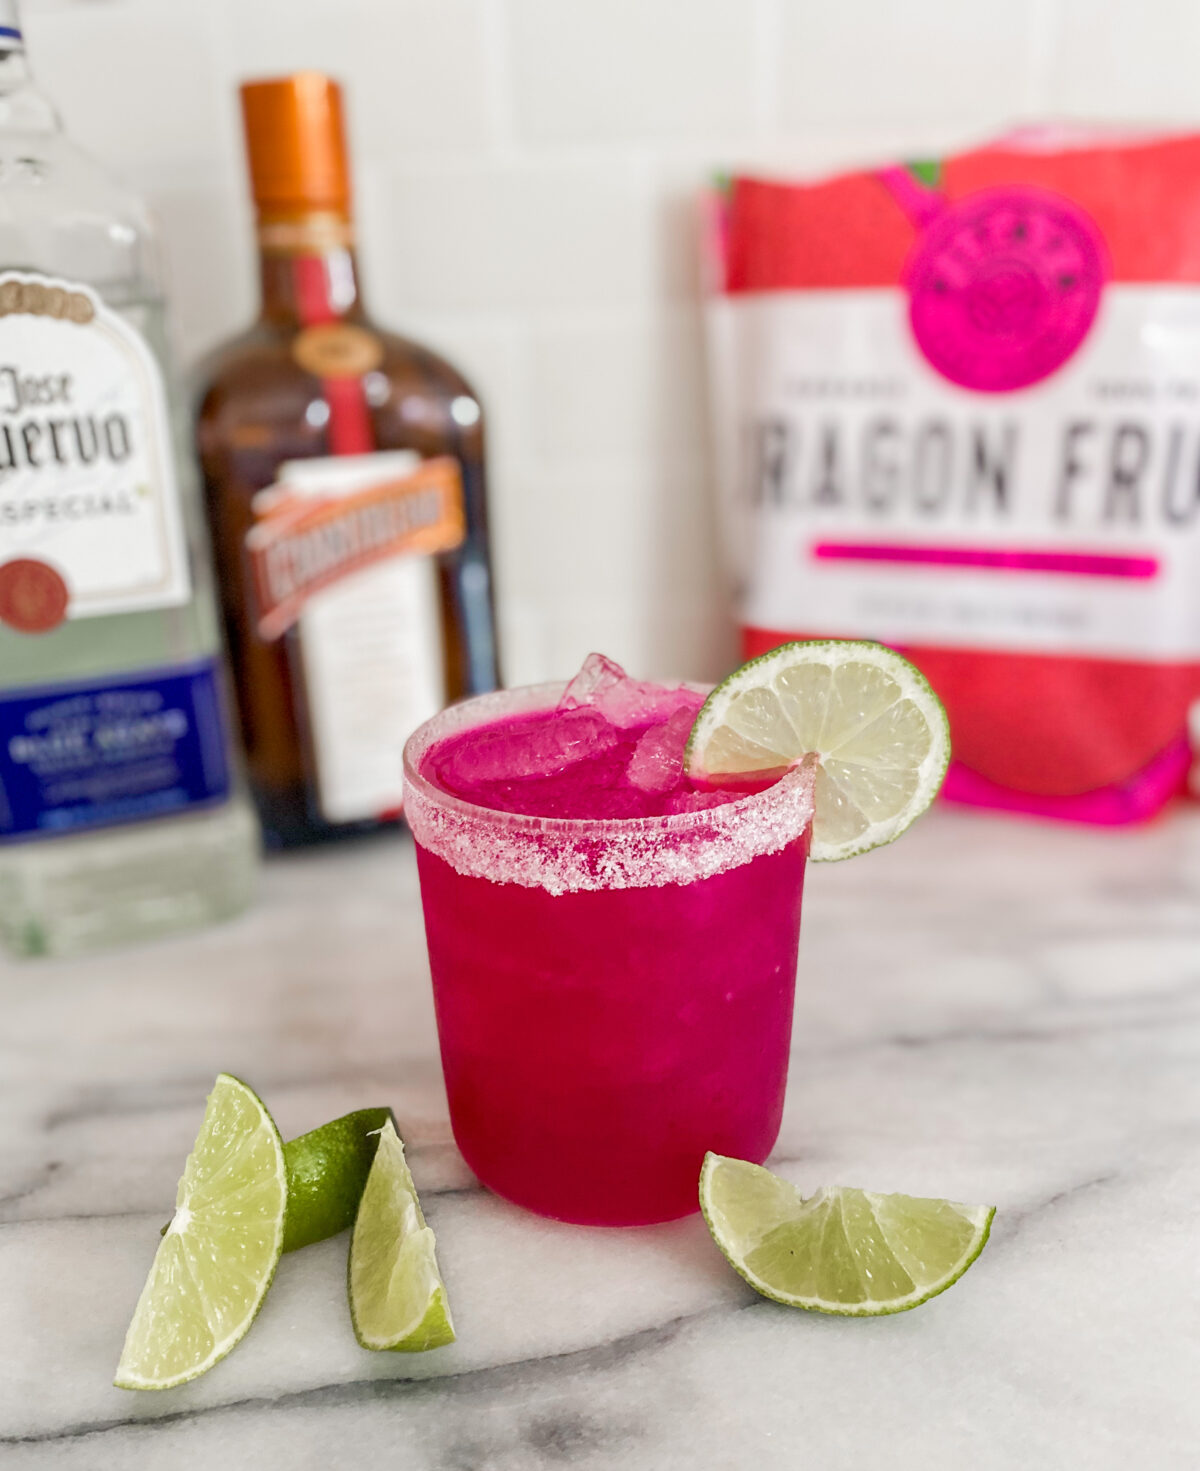 only 4 ingredients are needed to make this delicious and stunning dragonfruit magarita